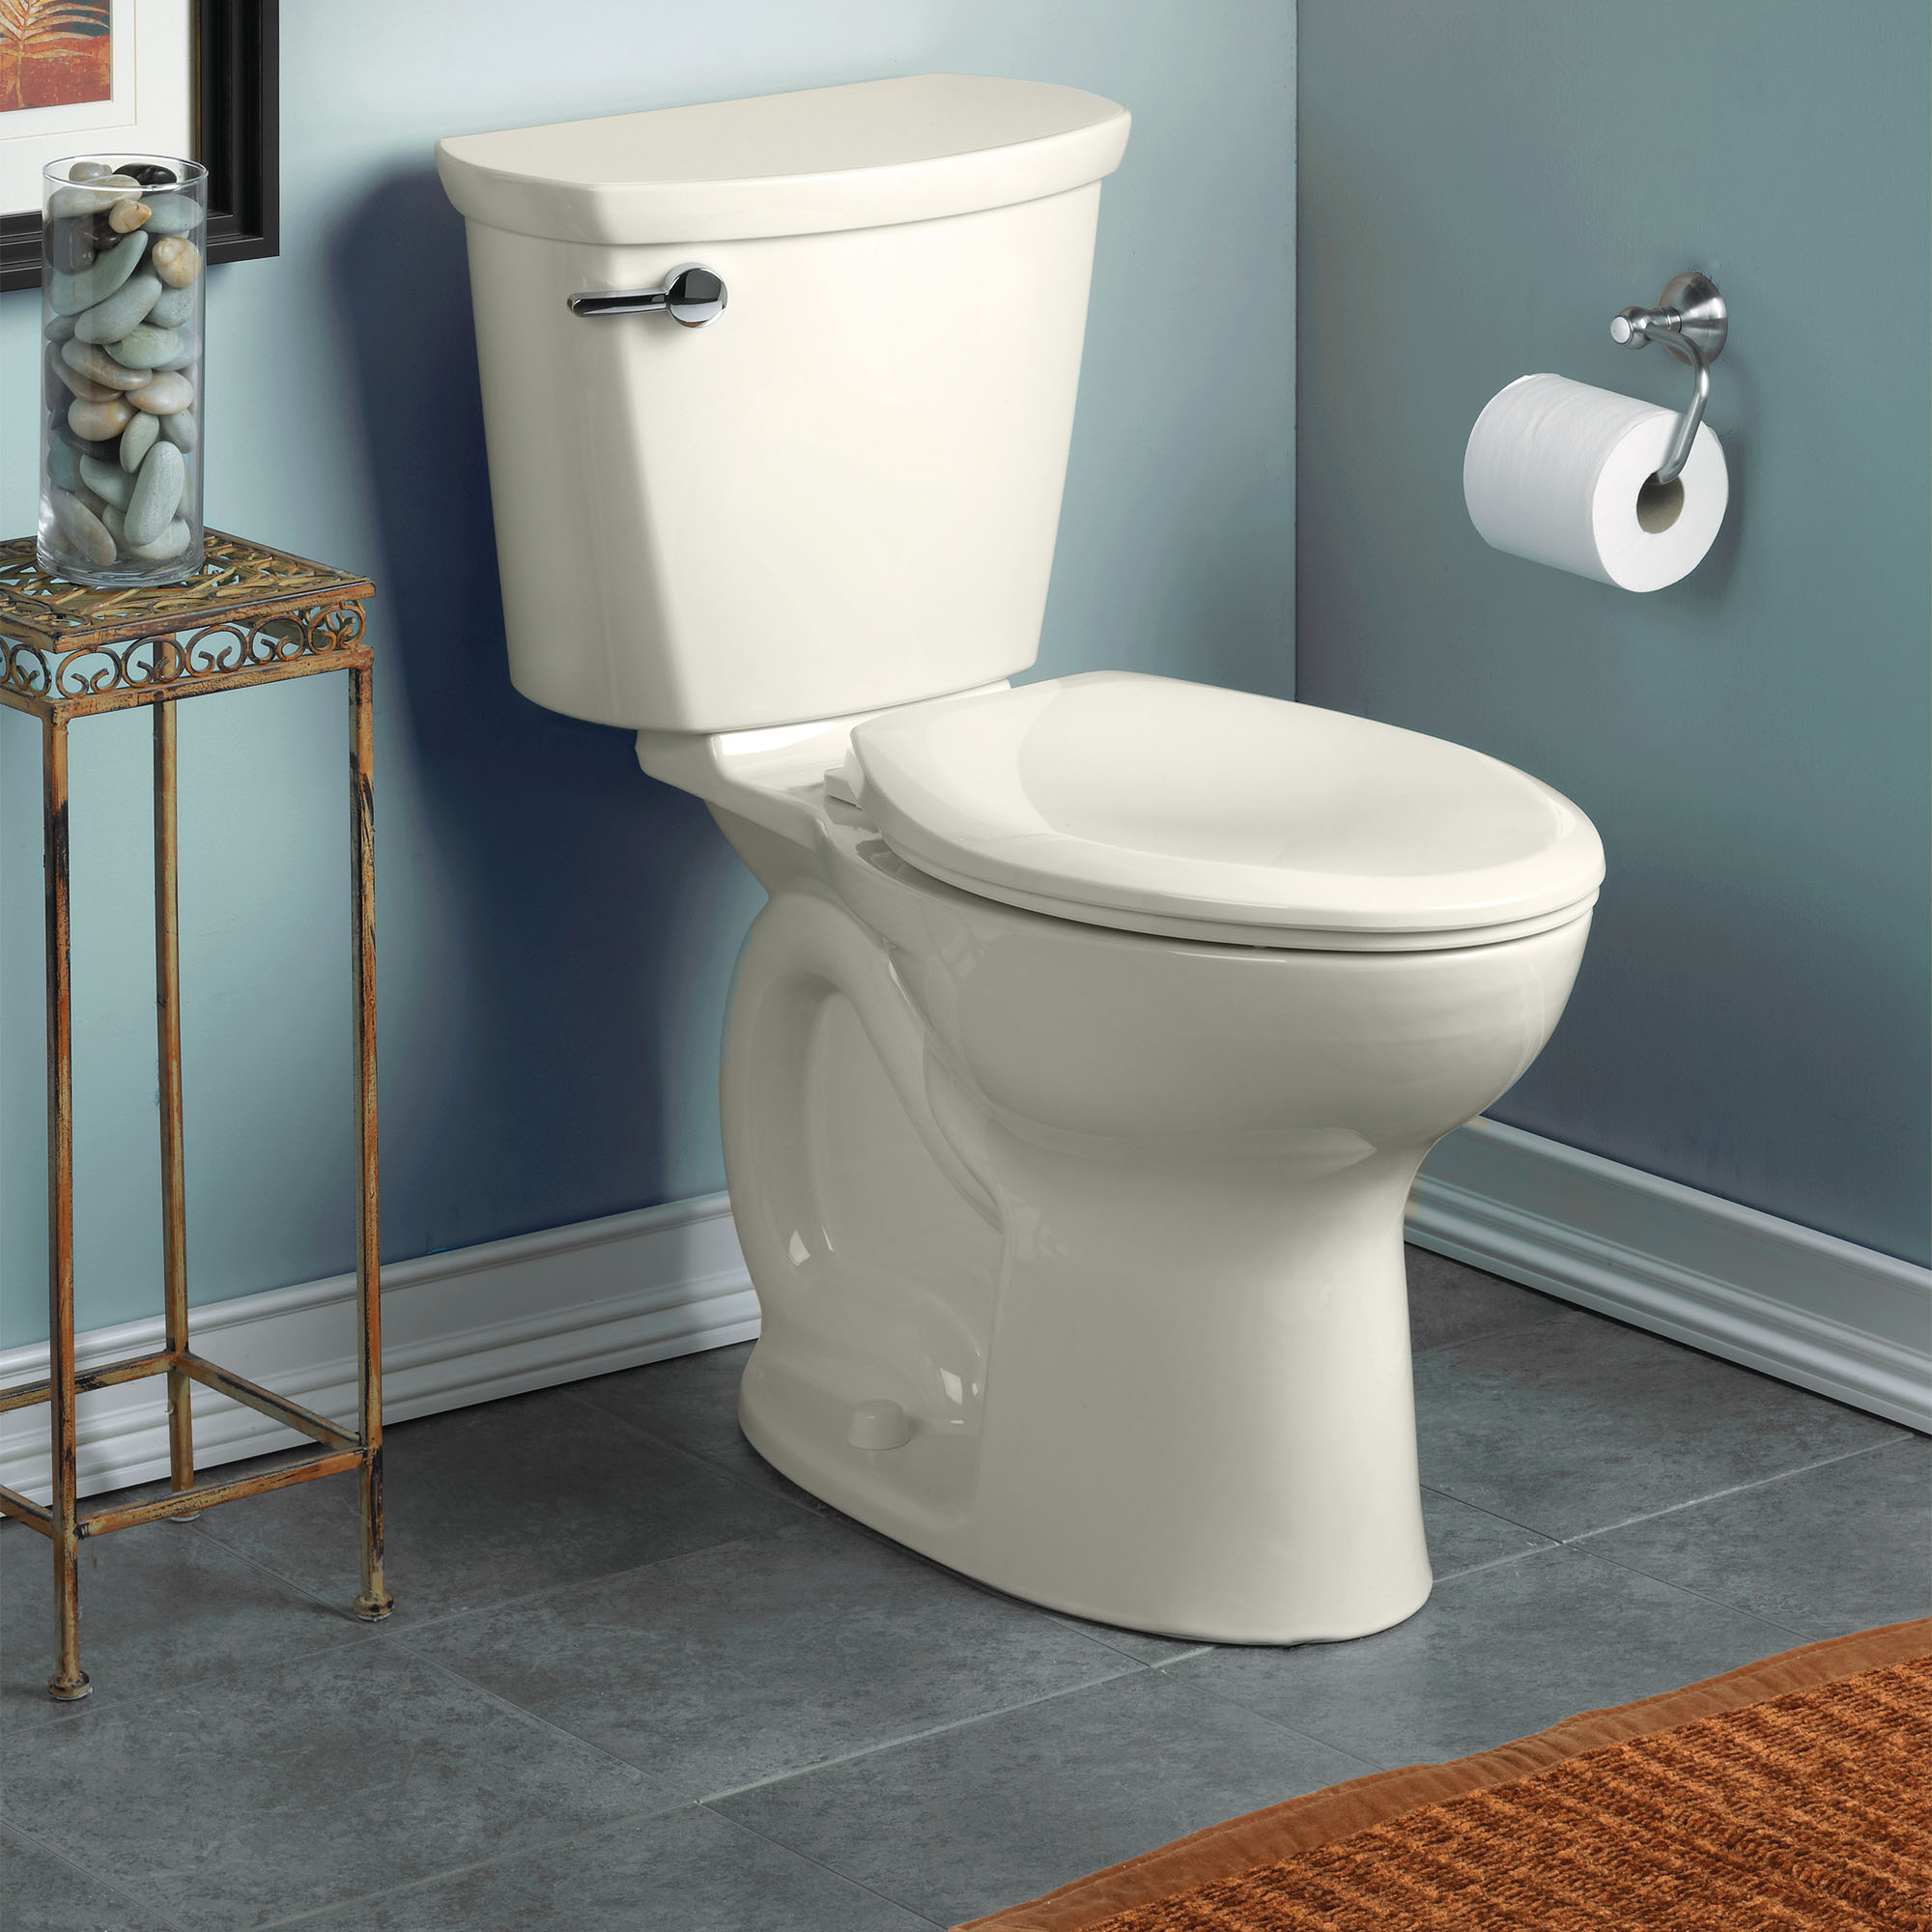 Cadet™ PRO Two-Piece 1.6 gpf/6.0 Lpf  Standard Height Elongated 10-Inch Rough Toilet Less Seat